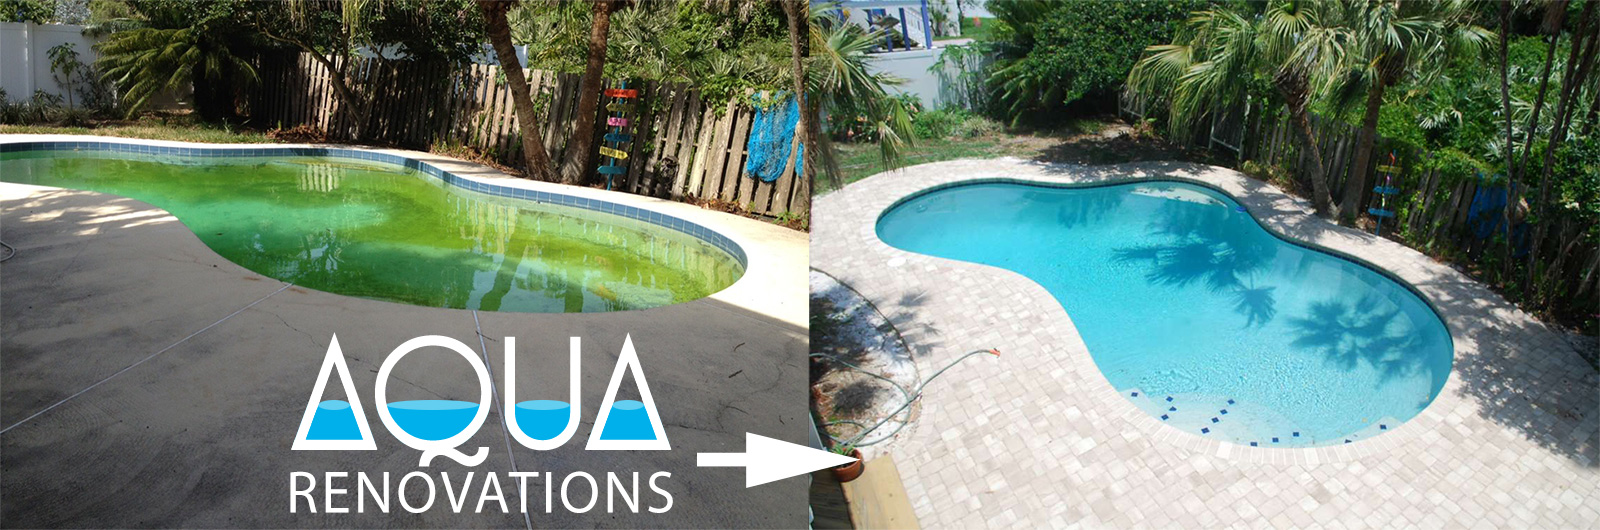 Pool renovation before and after